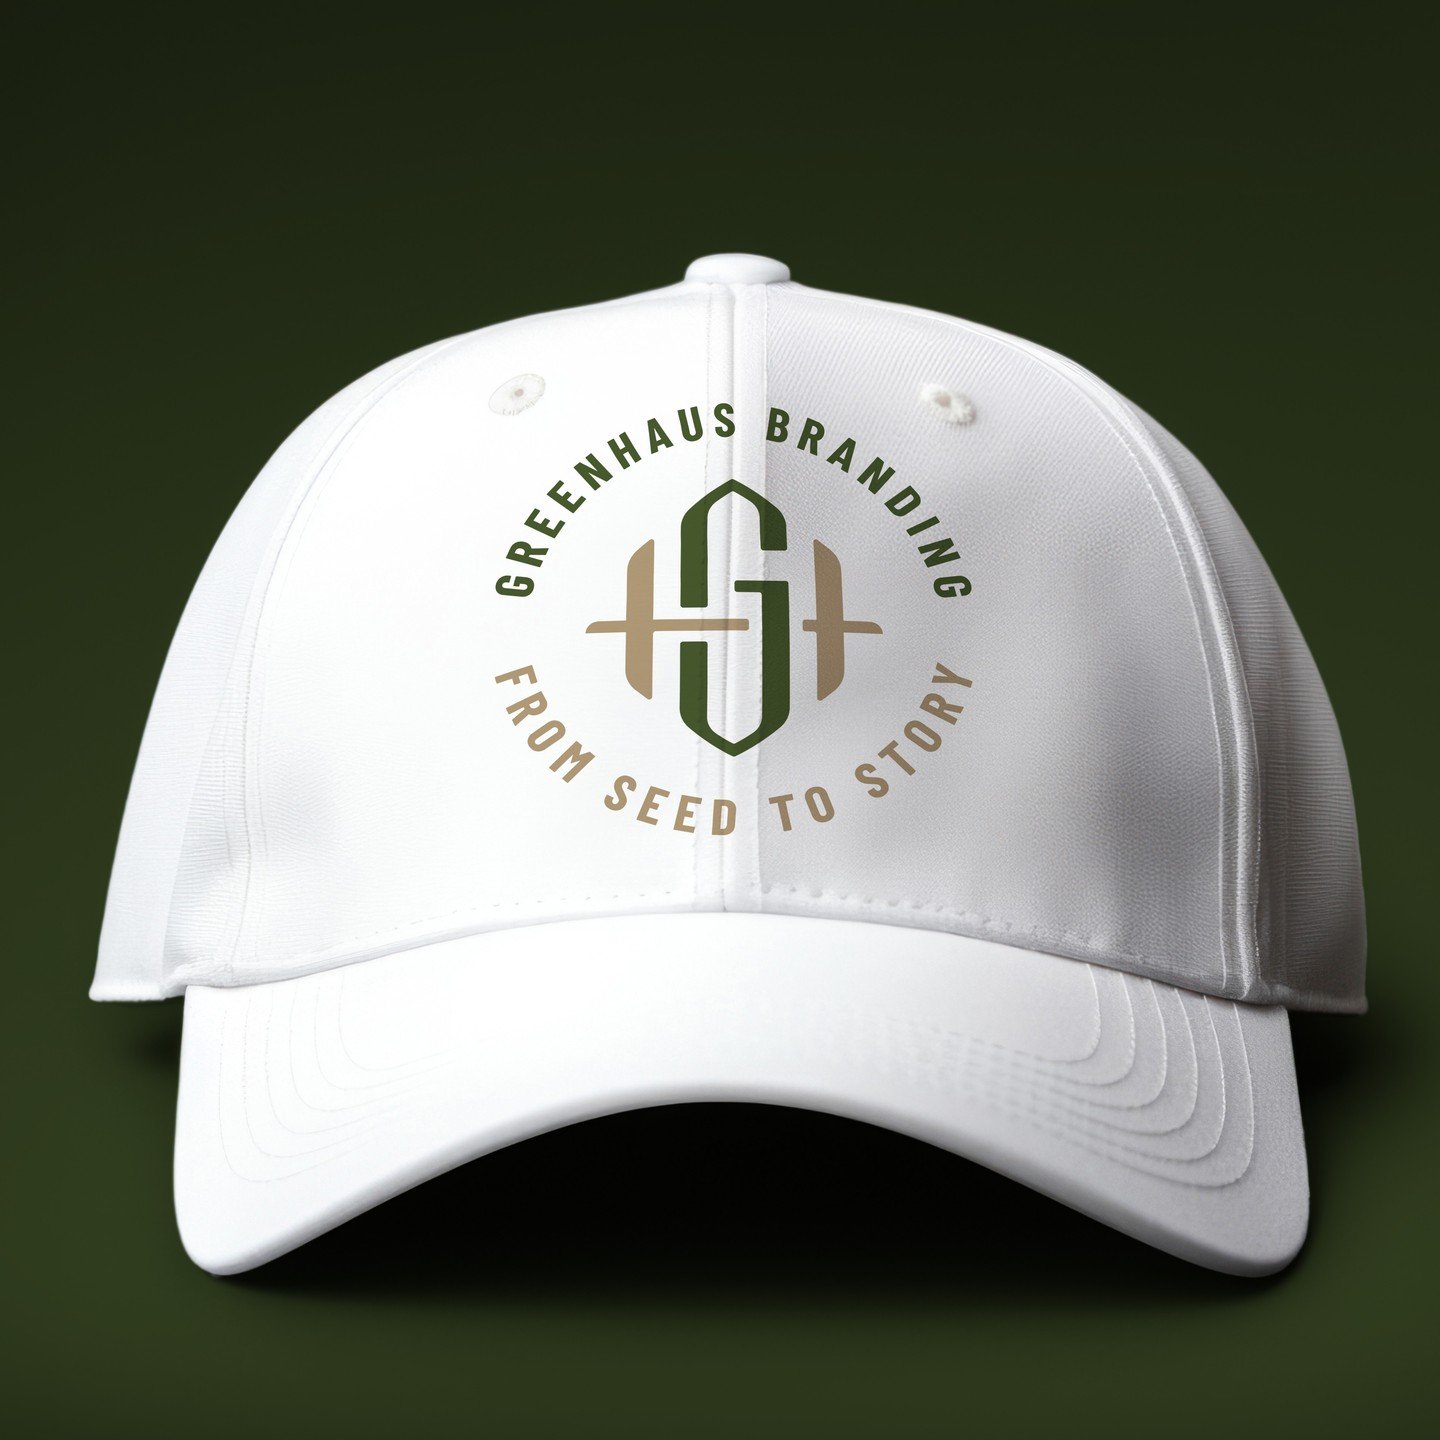 Hats are one of my personal favorite marketing tools. Tell me yours!

#hatdesign #smallbusinessbranding #logodesign #printmarketing #marketingdesign #visualbranding #printmarketing